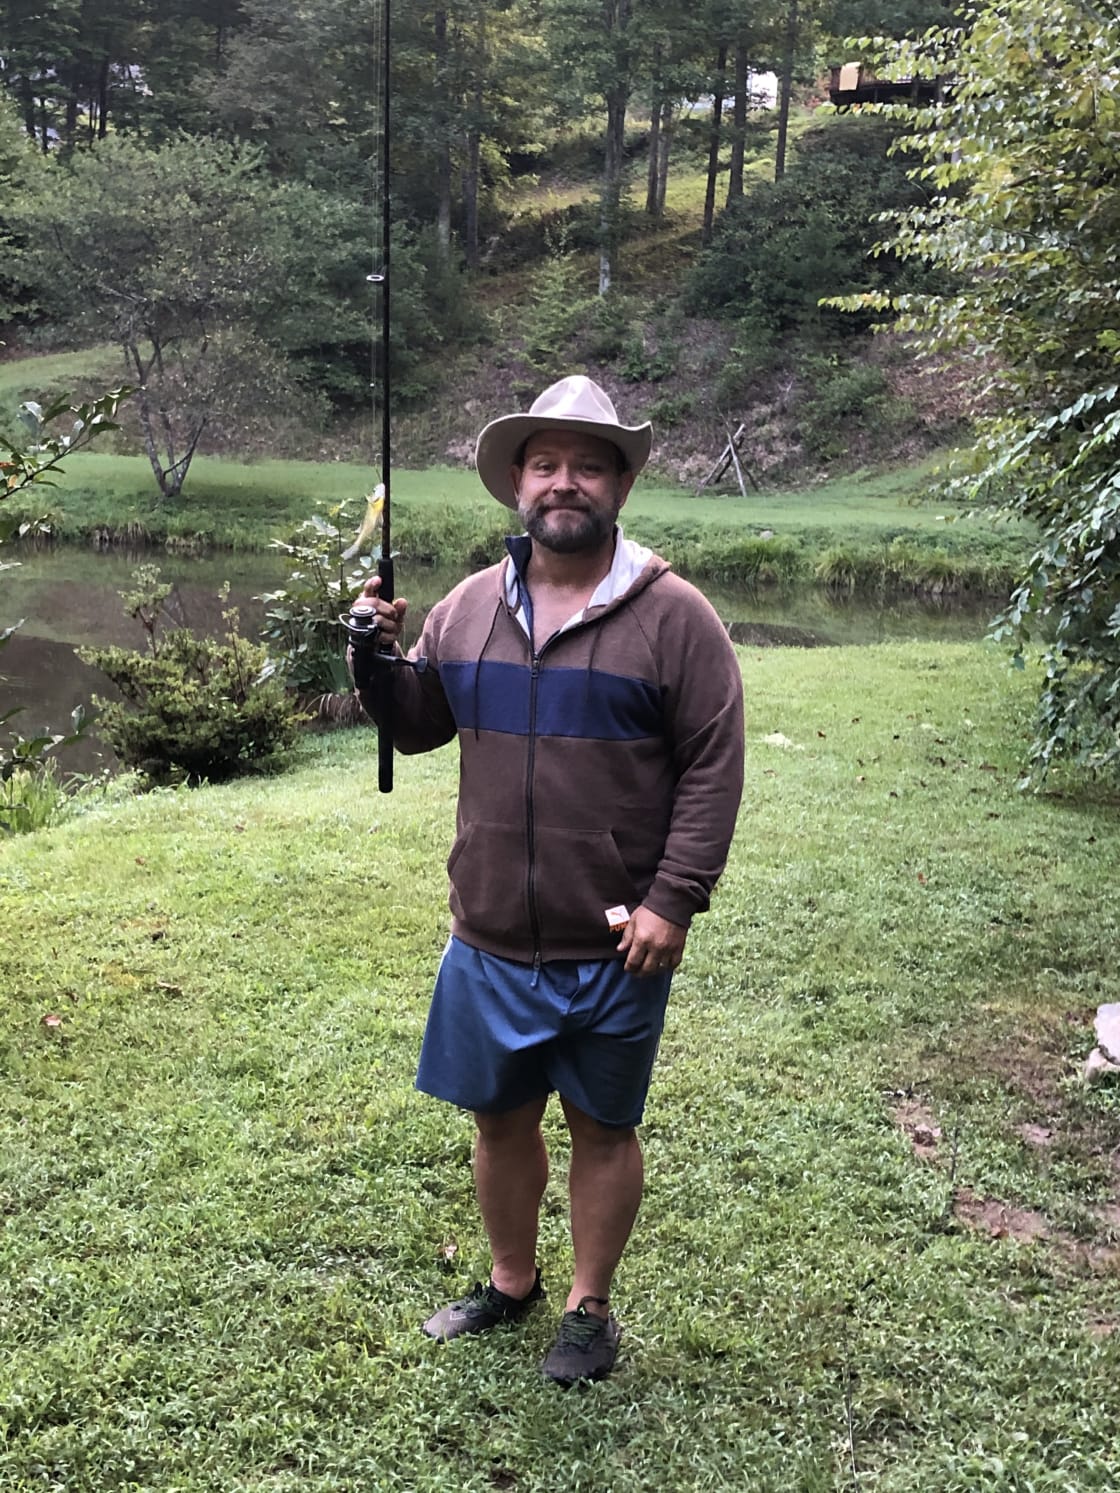 My husband even caught a fish! 